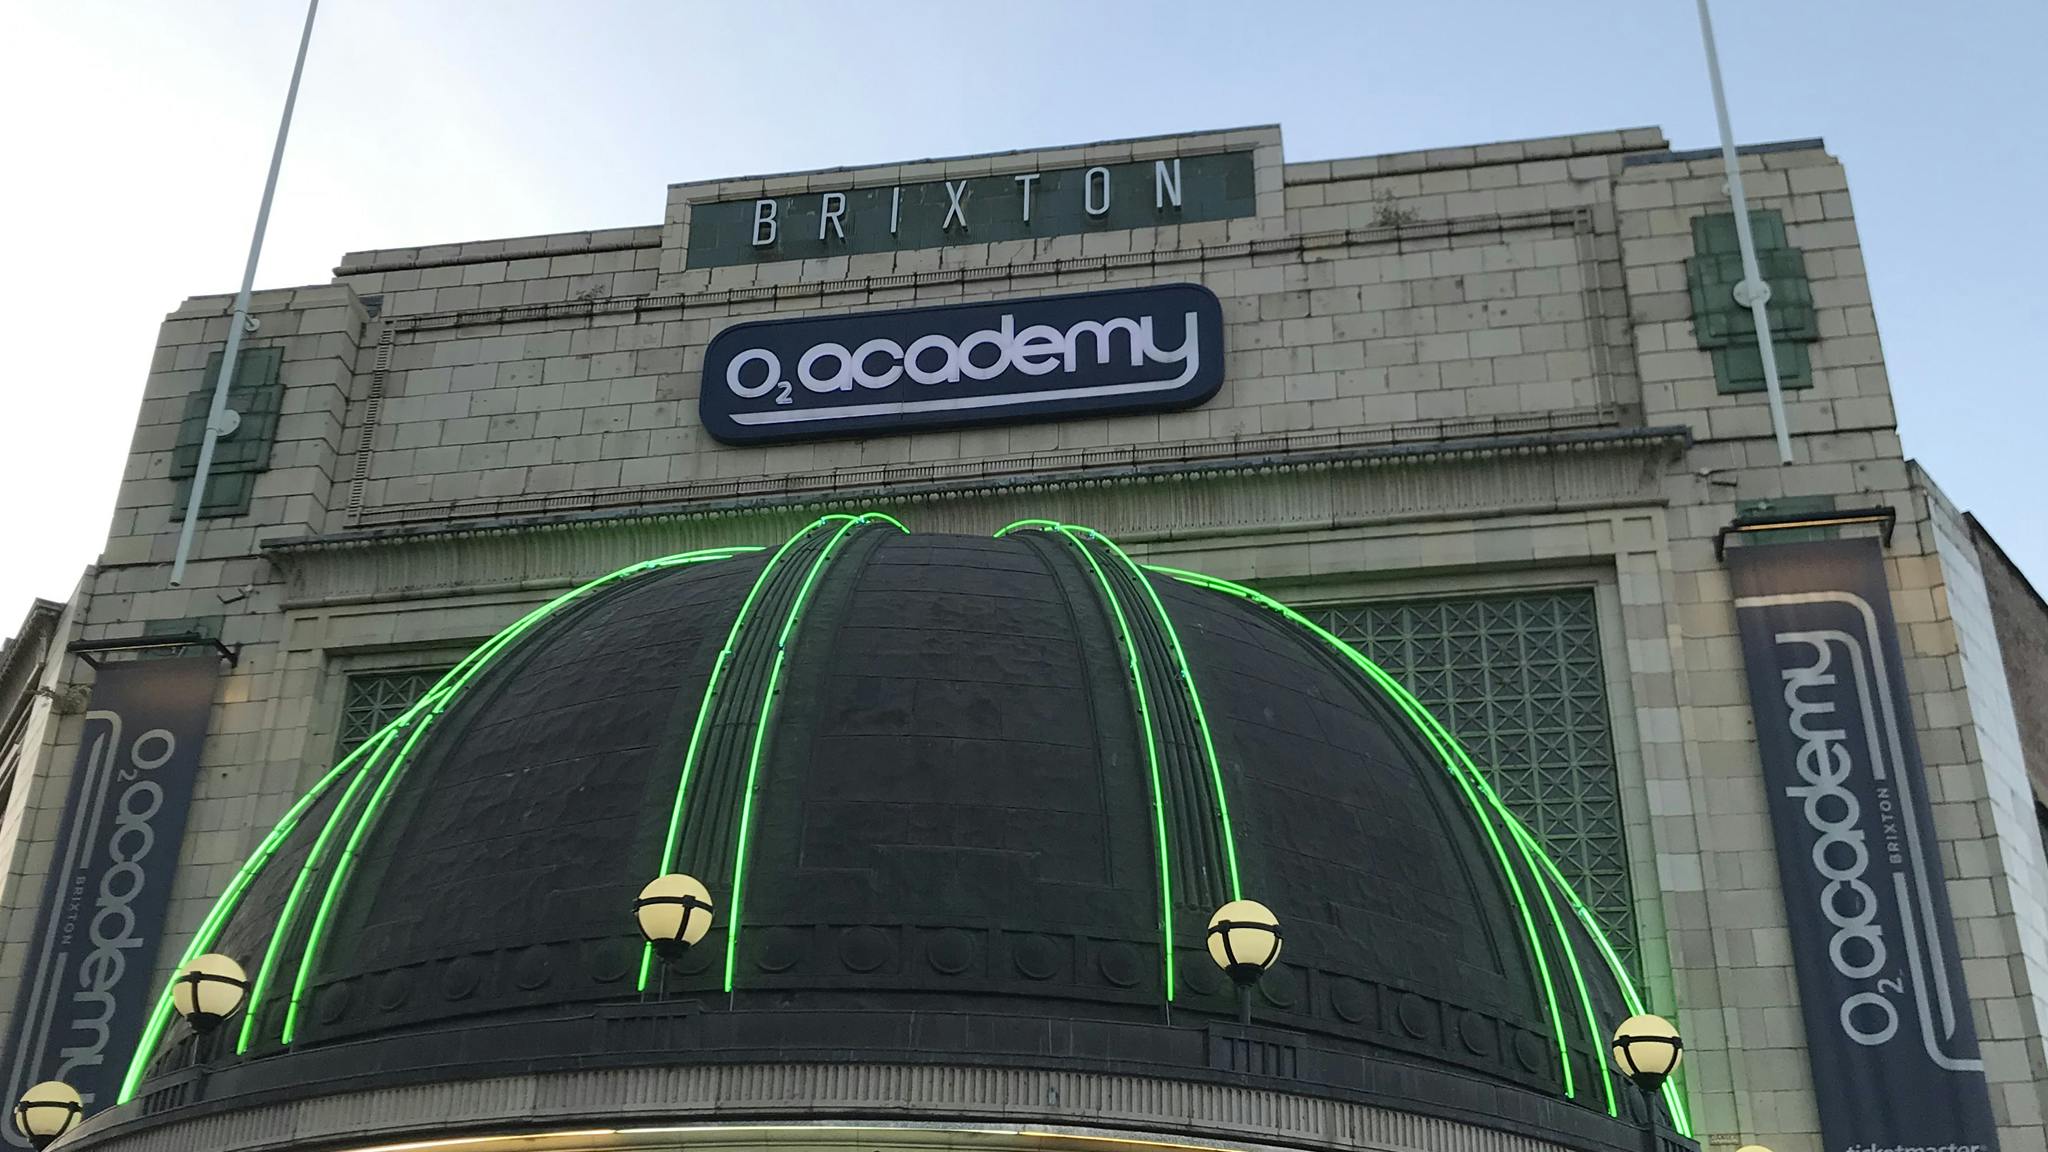 London’s O2 Academy Brixton to reopen once it meets 77 “extensive and robust” new safety conditions